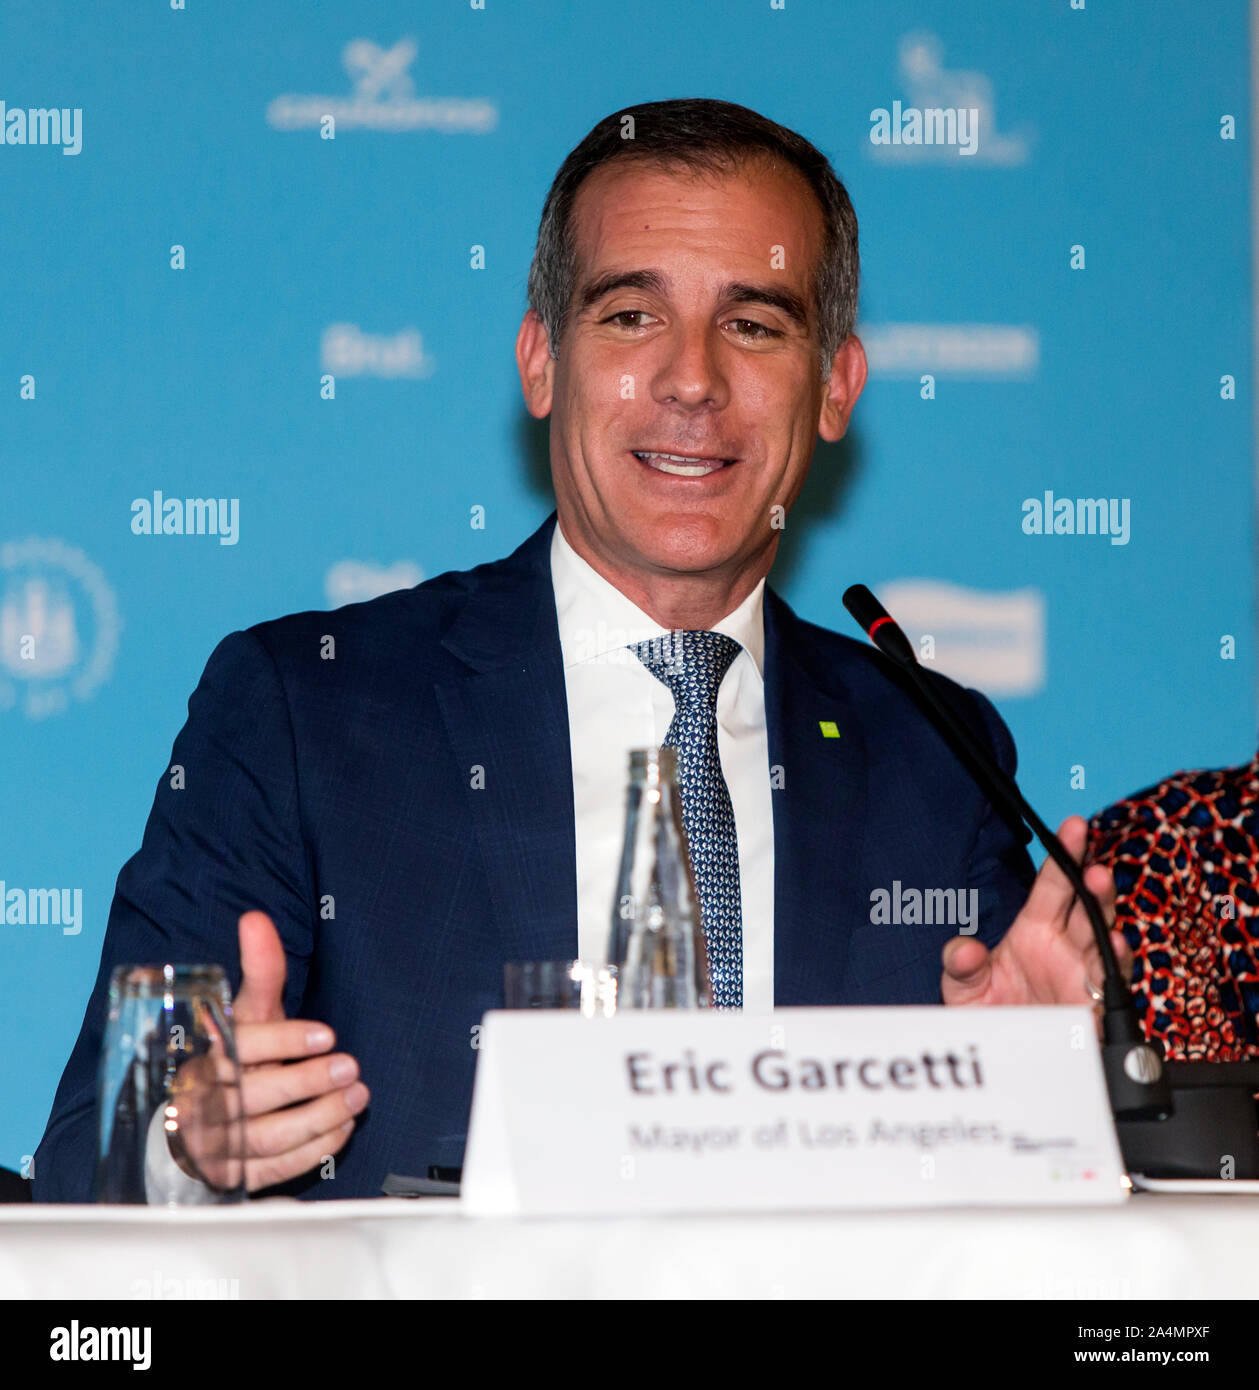 COPENHAGEN, DENMARK – OCTOBER 09, 2019: Mayor of Los Angeles and the coming Chair for the C40 World Mayors, Eric Garcetti, speaks during the C40 World Mayors Summit opening press conference at Copenhagen City Hall. More than 90 mayors of some of the world’s largest and most influential cities representing some 700 million people meet in Copenhagen from October 9-12 for the C40 World Mayors Summit. The purpose with the summit in Copenhagen is to build a global coalition of leading cities, businesses and citizens that rallies around radical and ambitious climate action. Also youth leaders from t Stock Photo